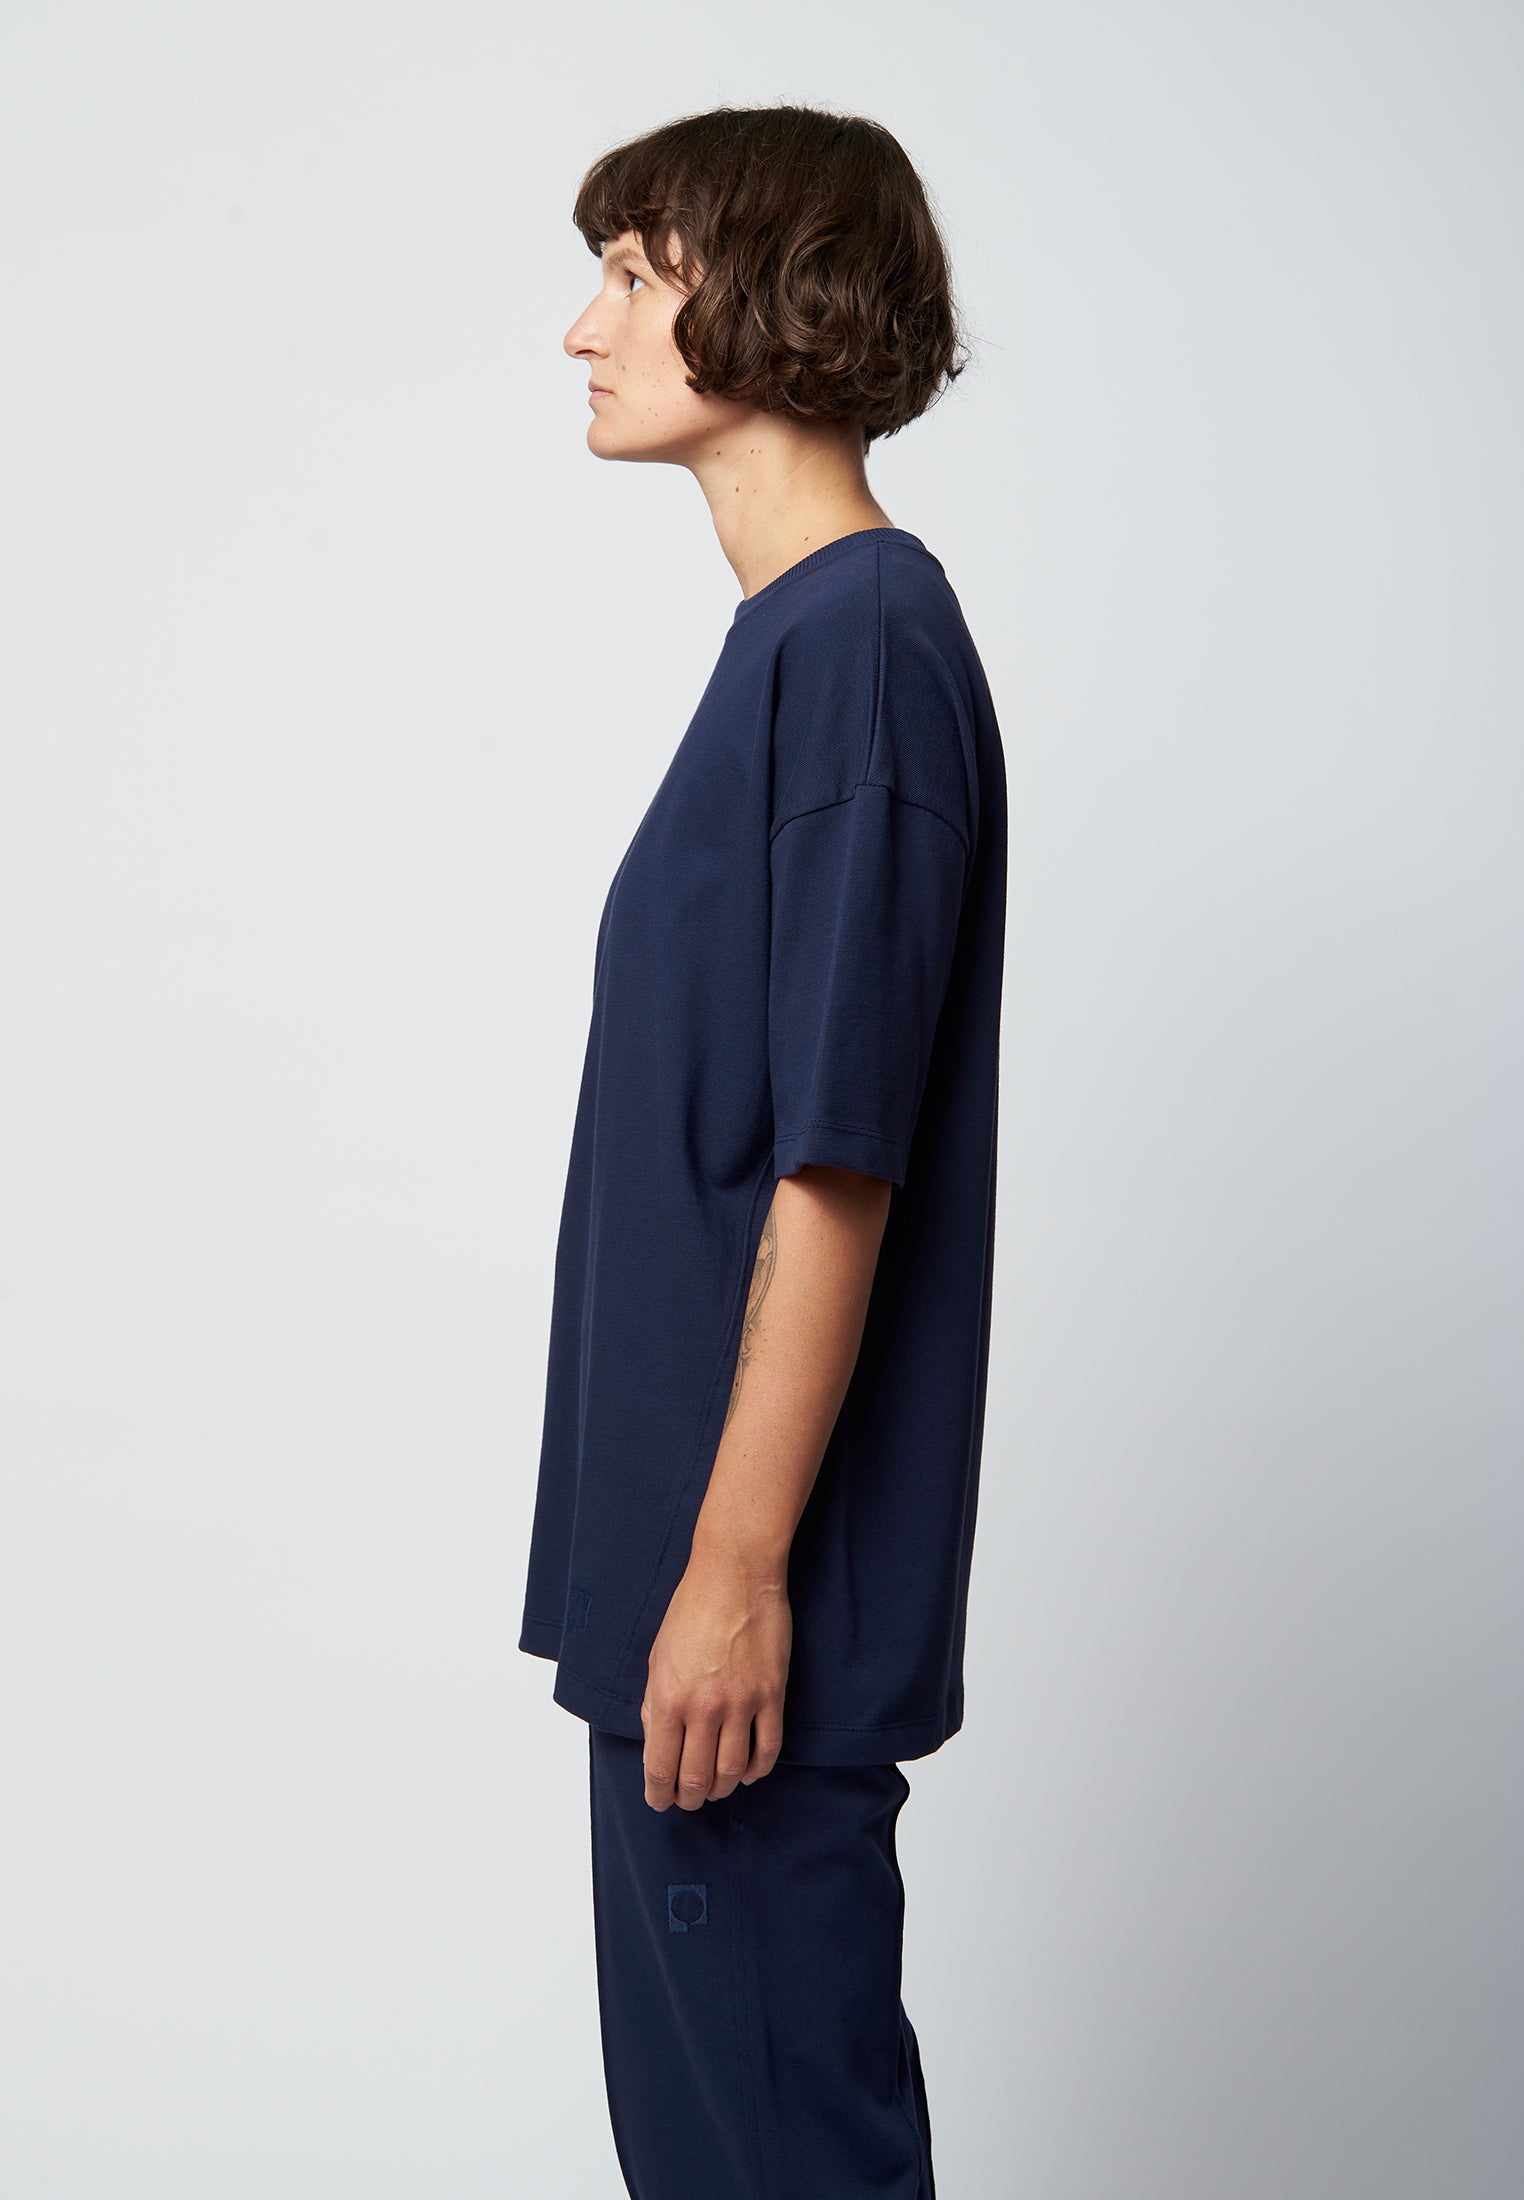 Project Cece | Organic cotton oversized t-shirt MALIN in navy blue